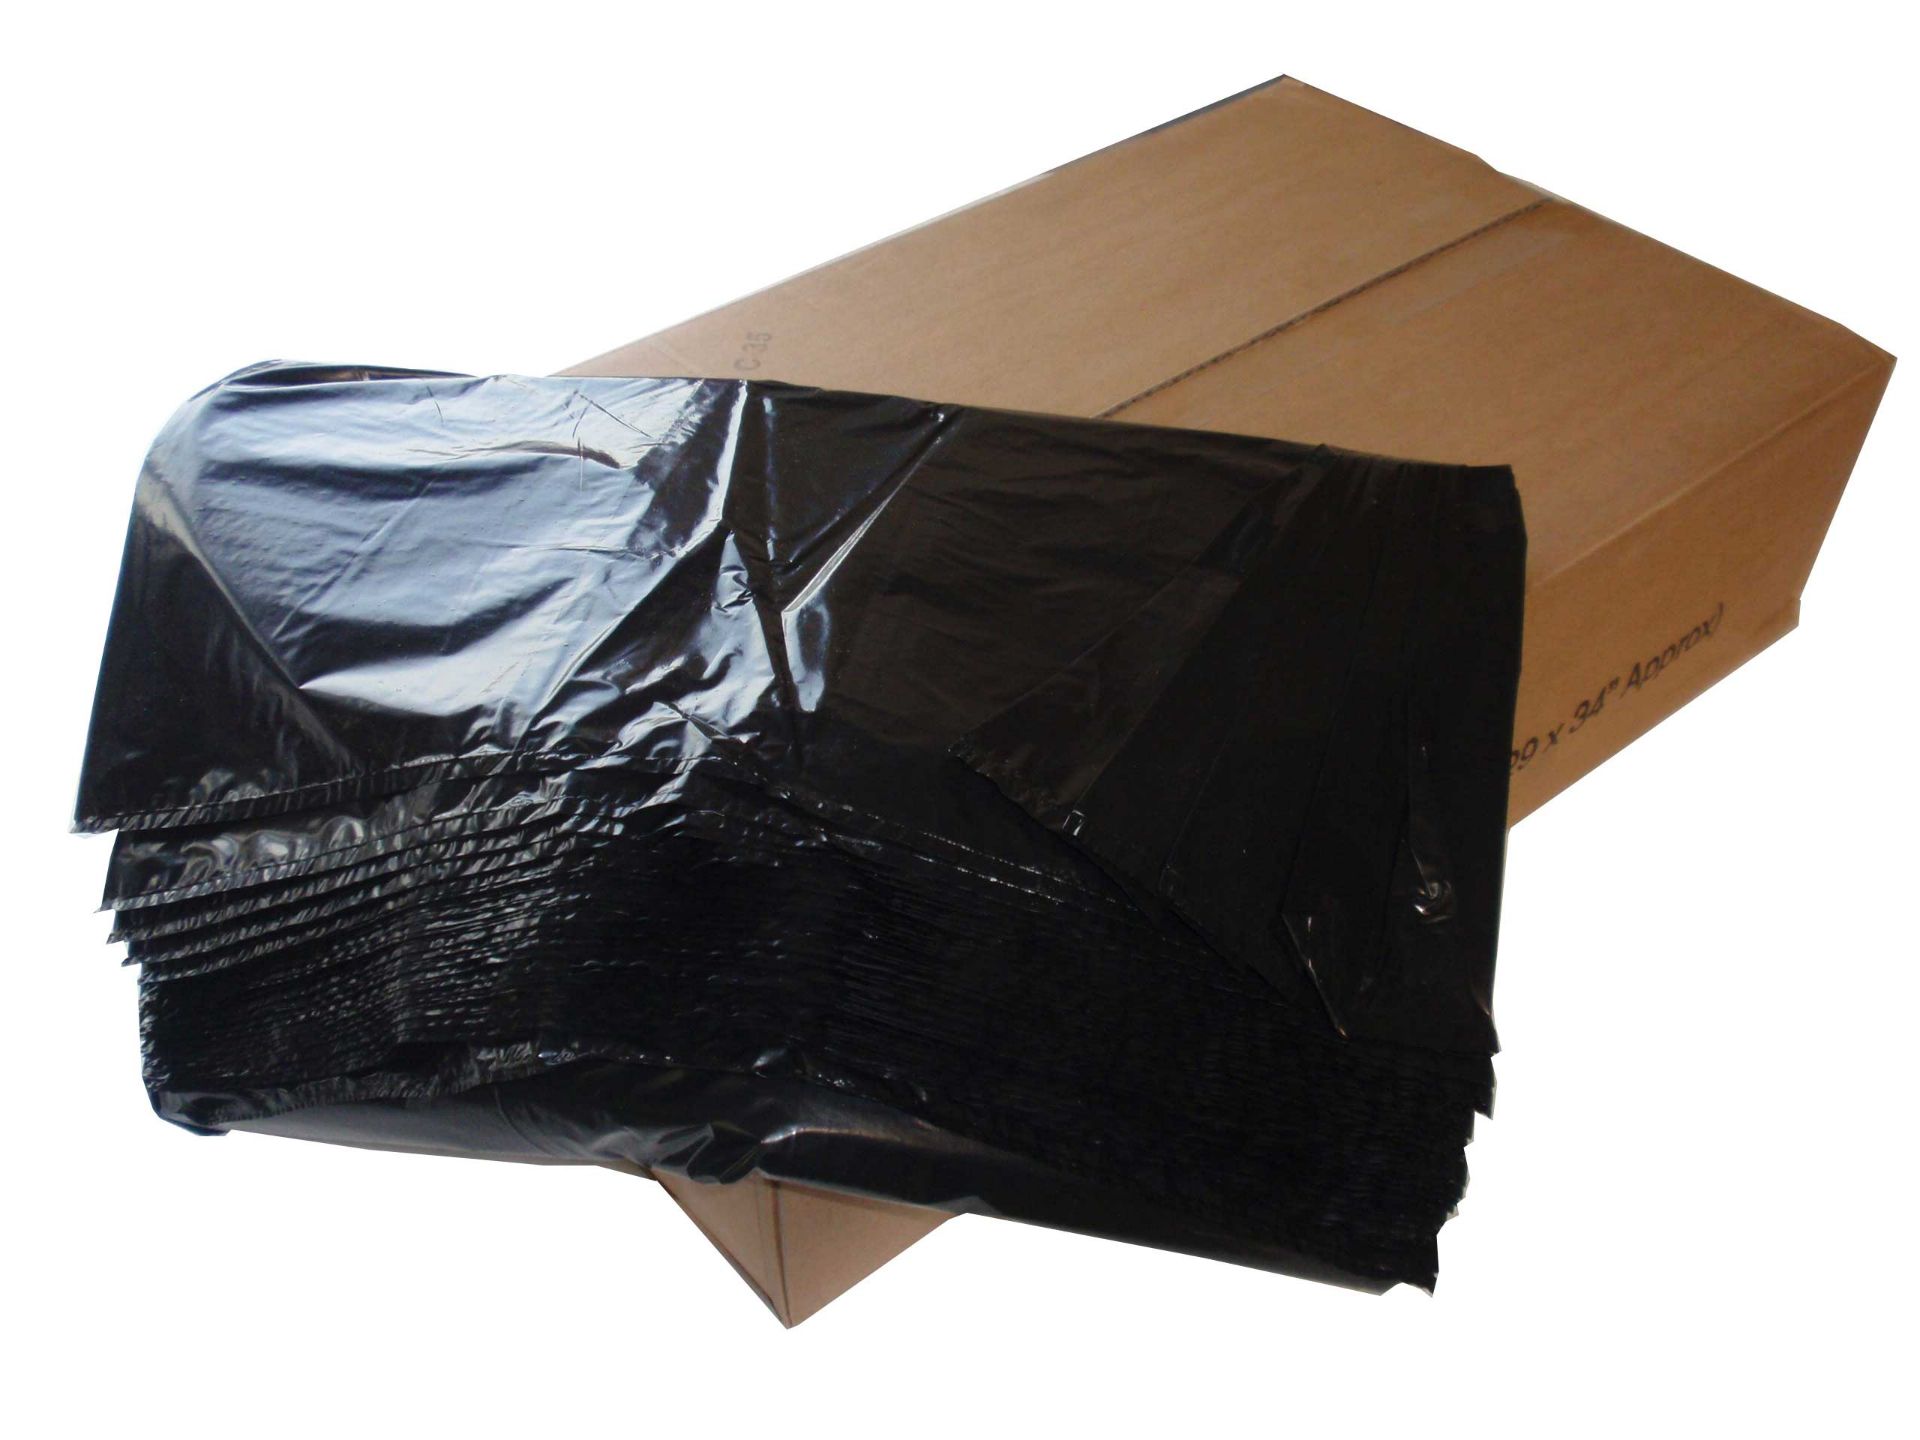 V Brand New 100 Black refuse Sacks 864 x 1168 mm (Approx 140 litres) ISP £32.70 (Bunzl Cleaning) X 2